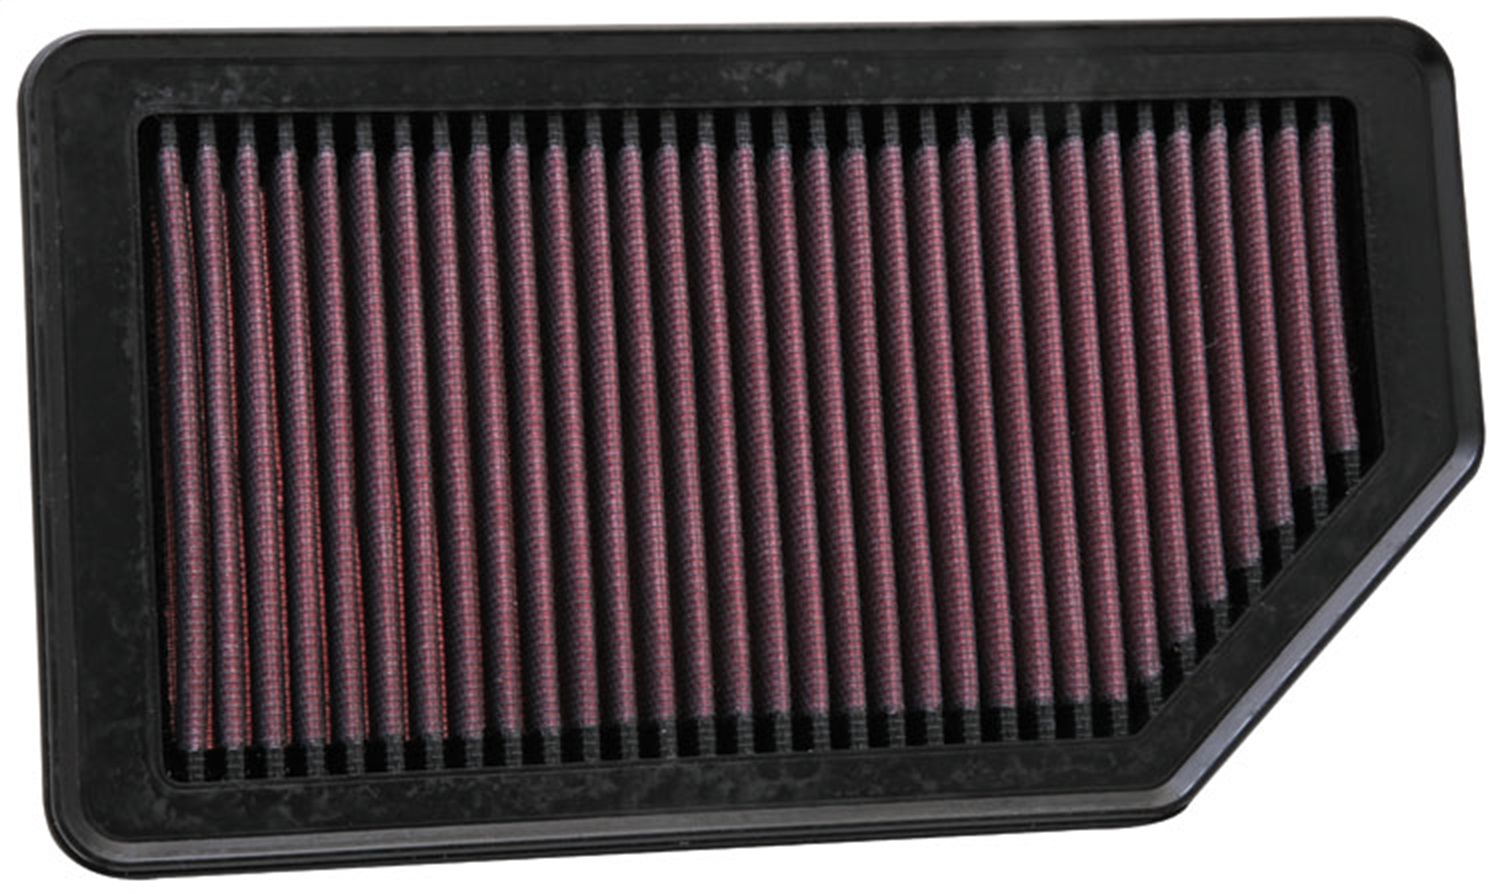 K&N Filters K&N Filters 33-2472 Air Filter Fits 11-15 Accent Rio Soul Veloster